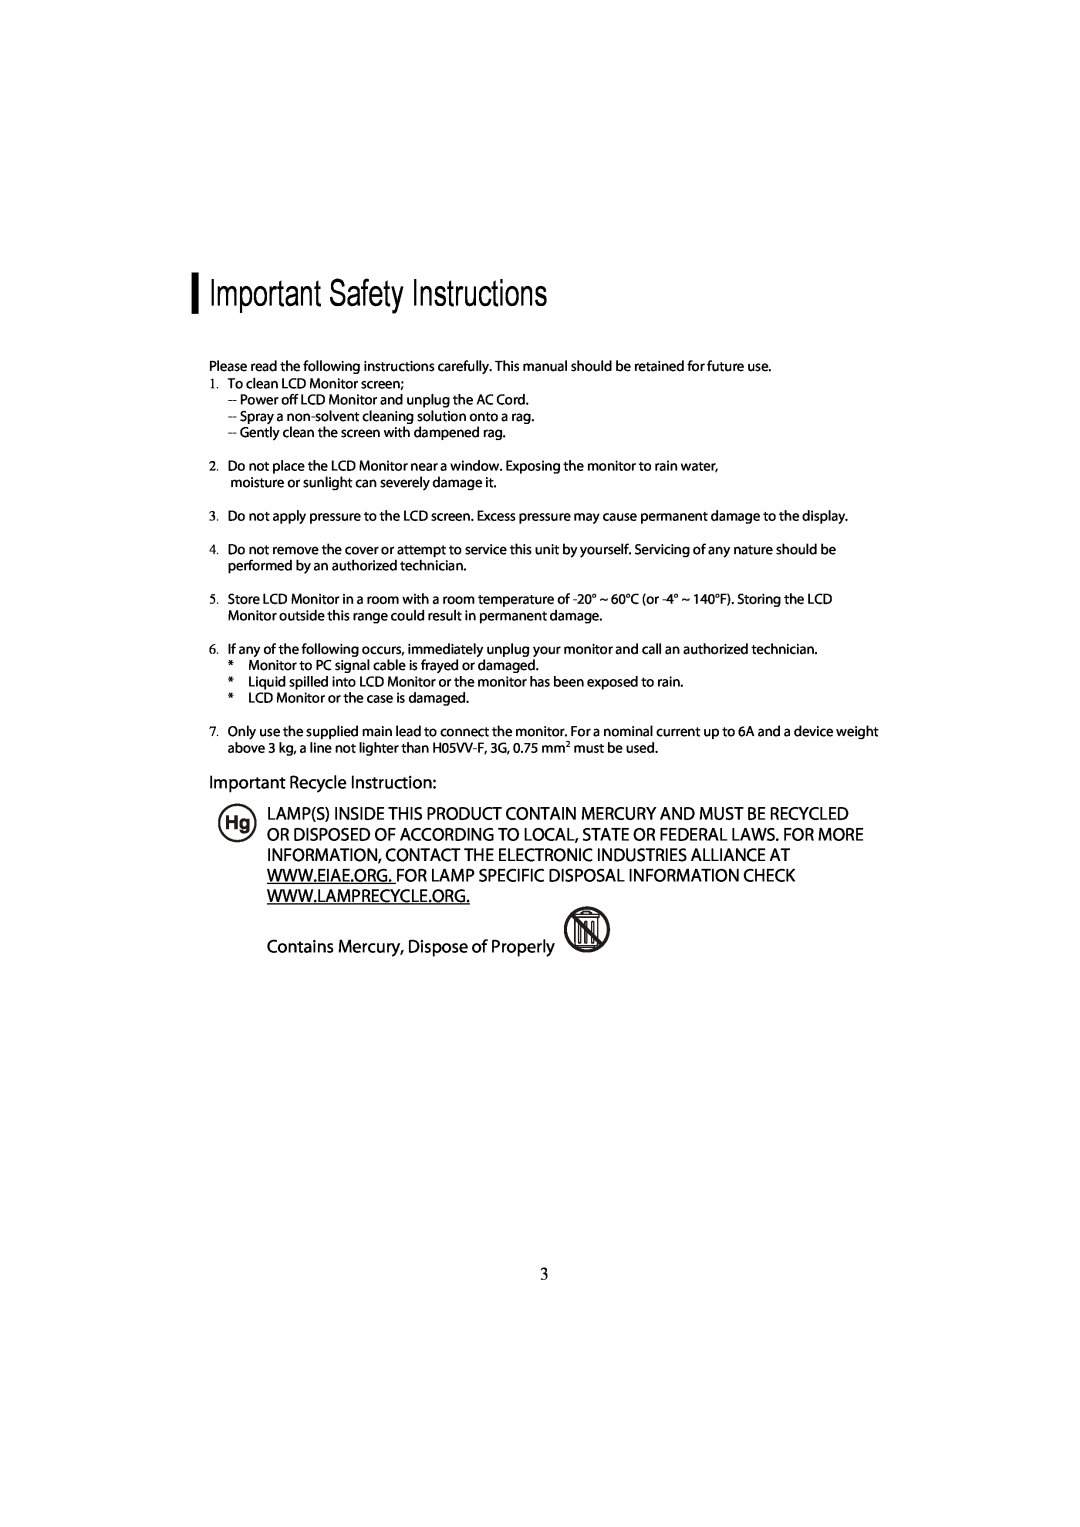 Planar PL1910MW manual Important Safety Instructions, Important Recycle Instruction, Contains Mercury, Dispose of Properly 